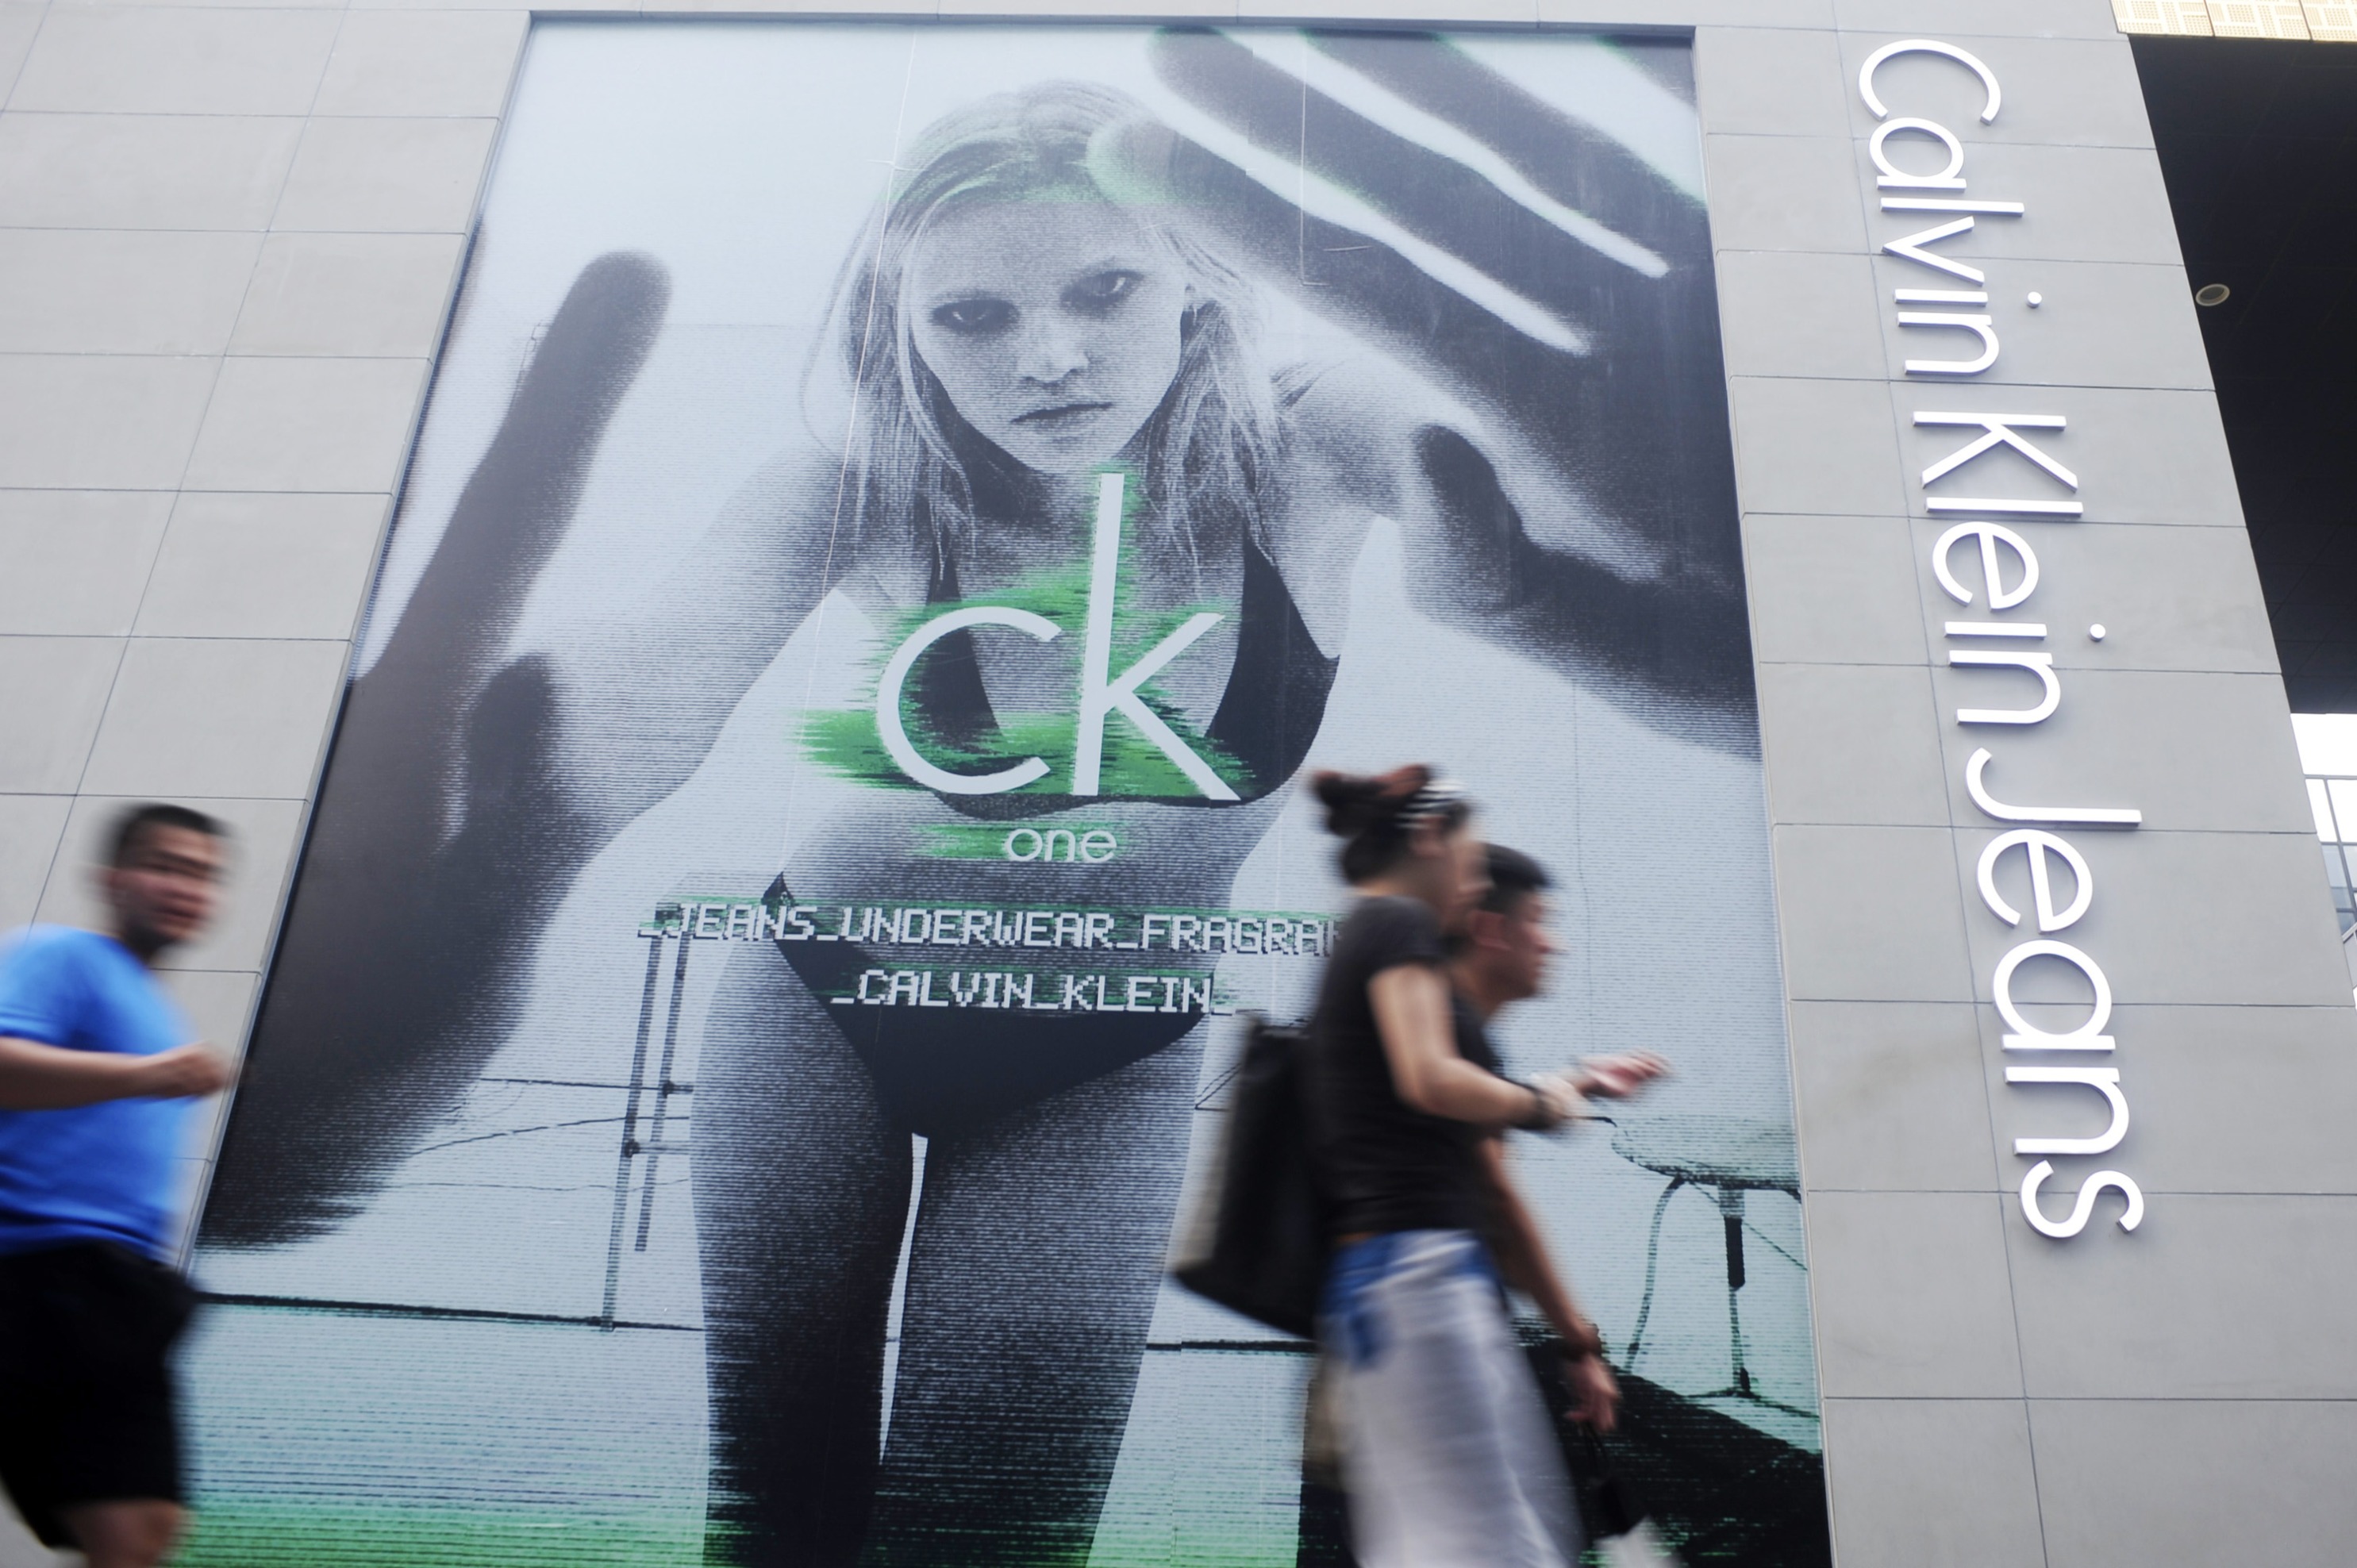 Calvin Klein to close its flagship store in New York - CGTN